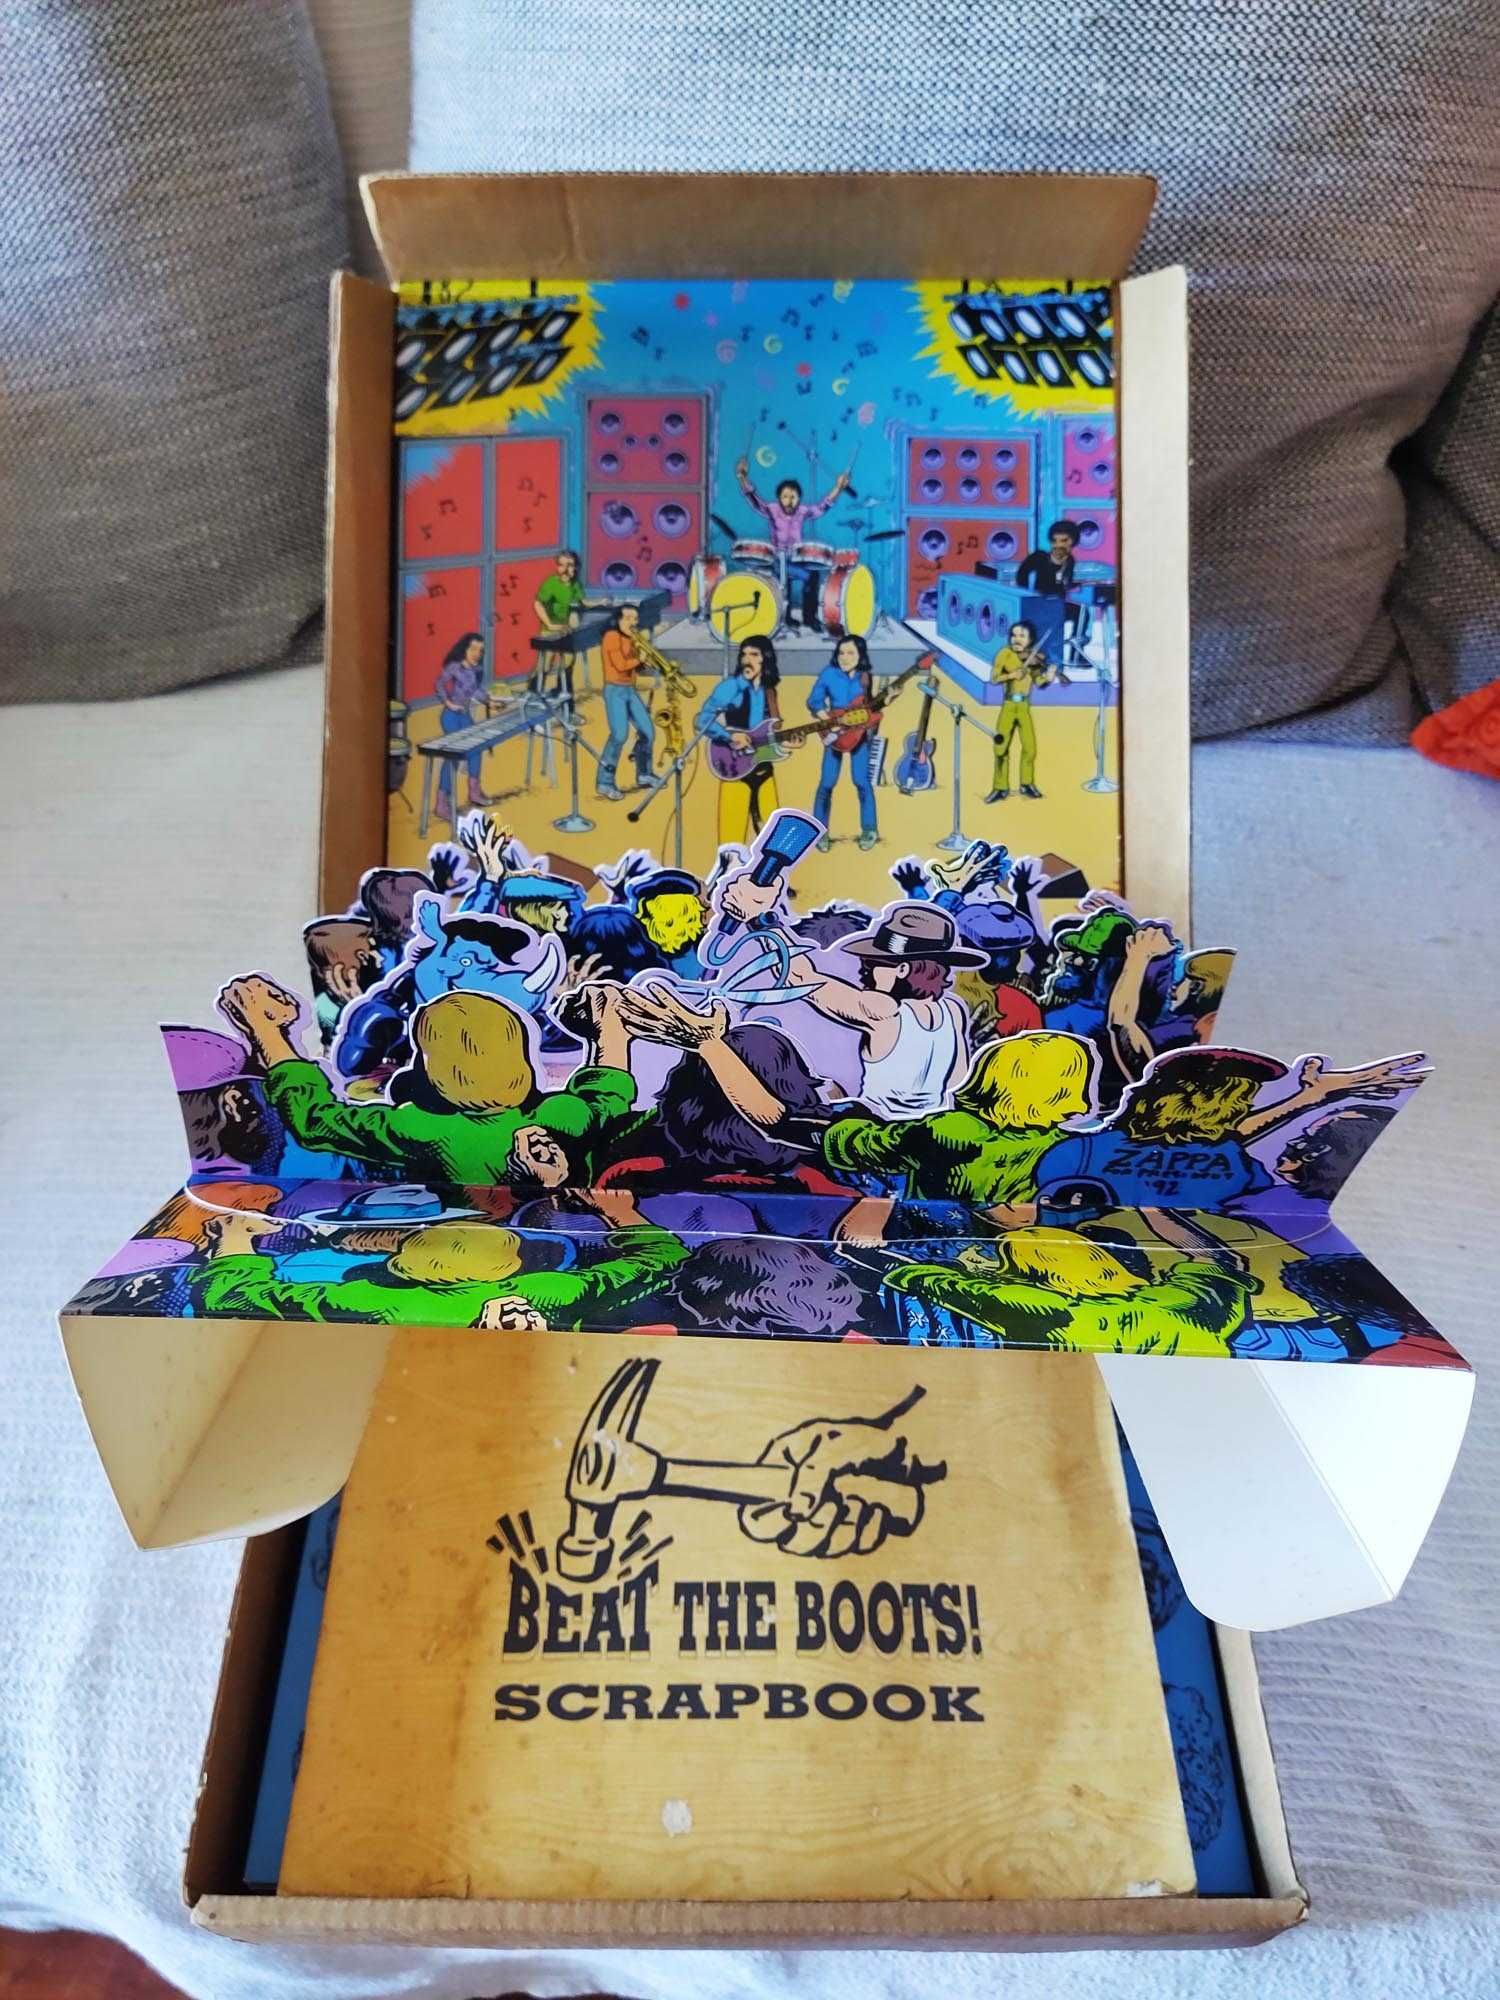 Frank Zappa - BEAT THE BOOTS LIMITED EDITION - 8 LP's novos.